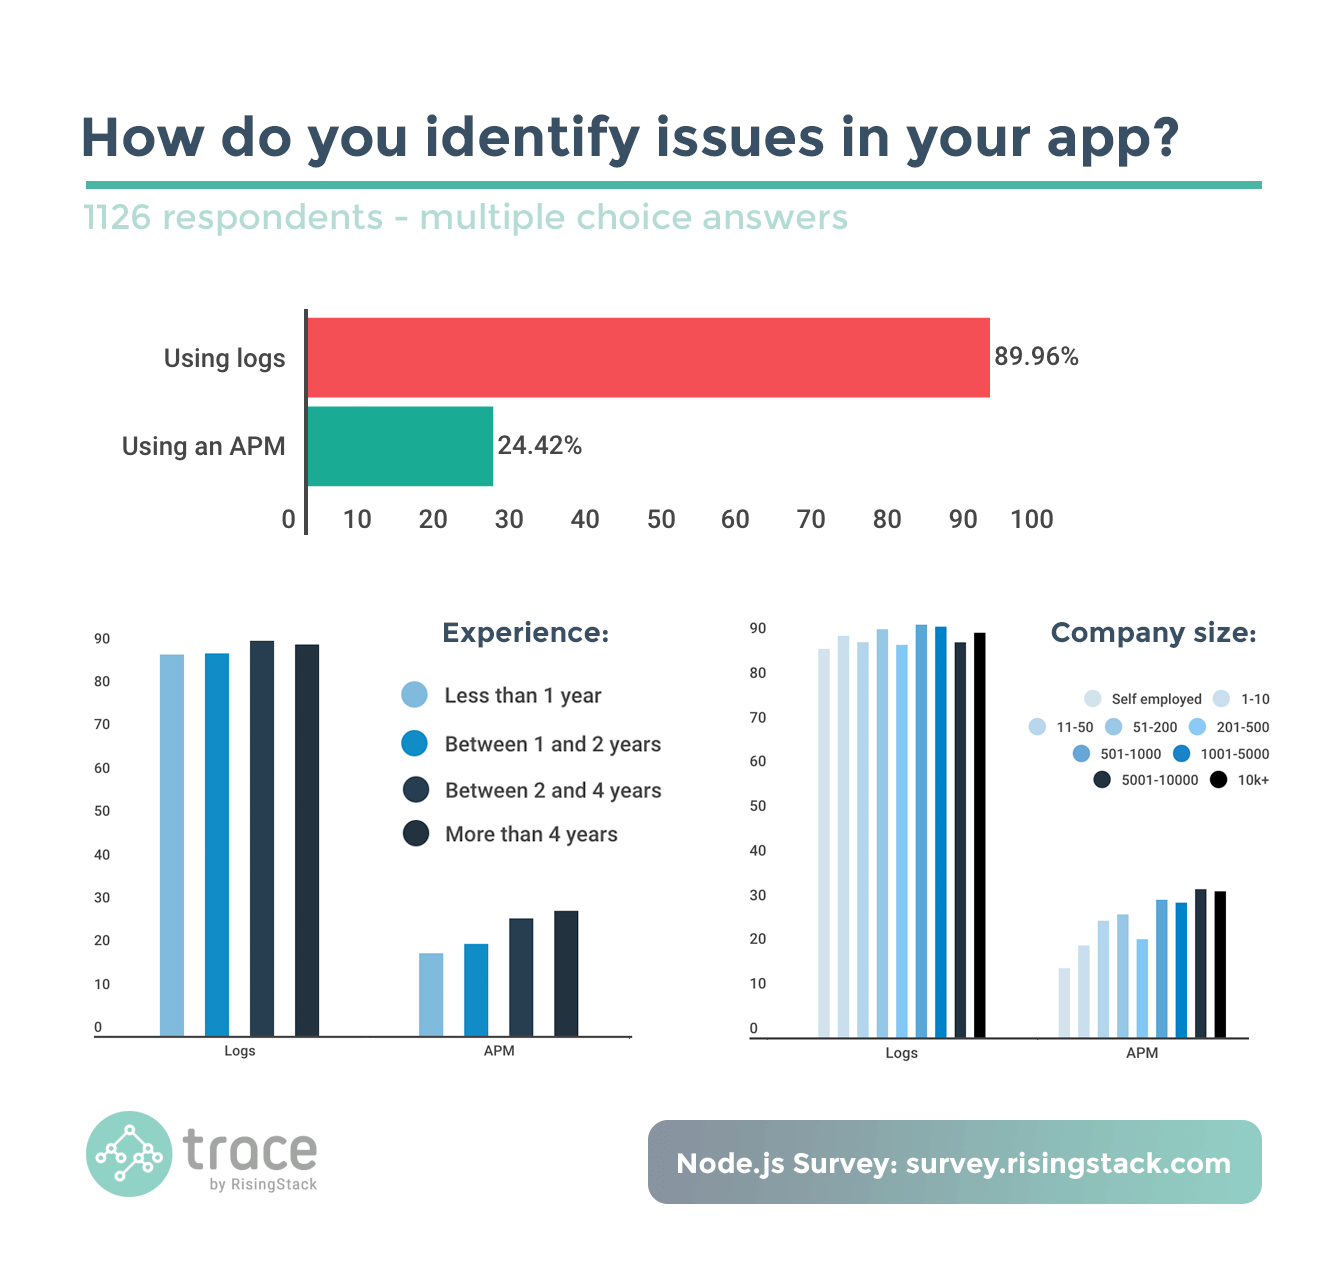 Node.js Survey - How do you identify issues in your app? Using logs.